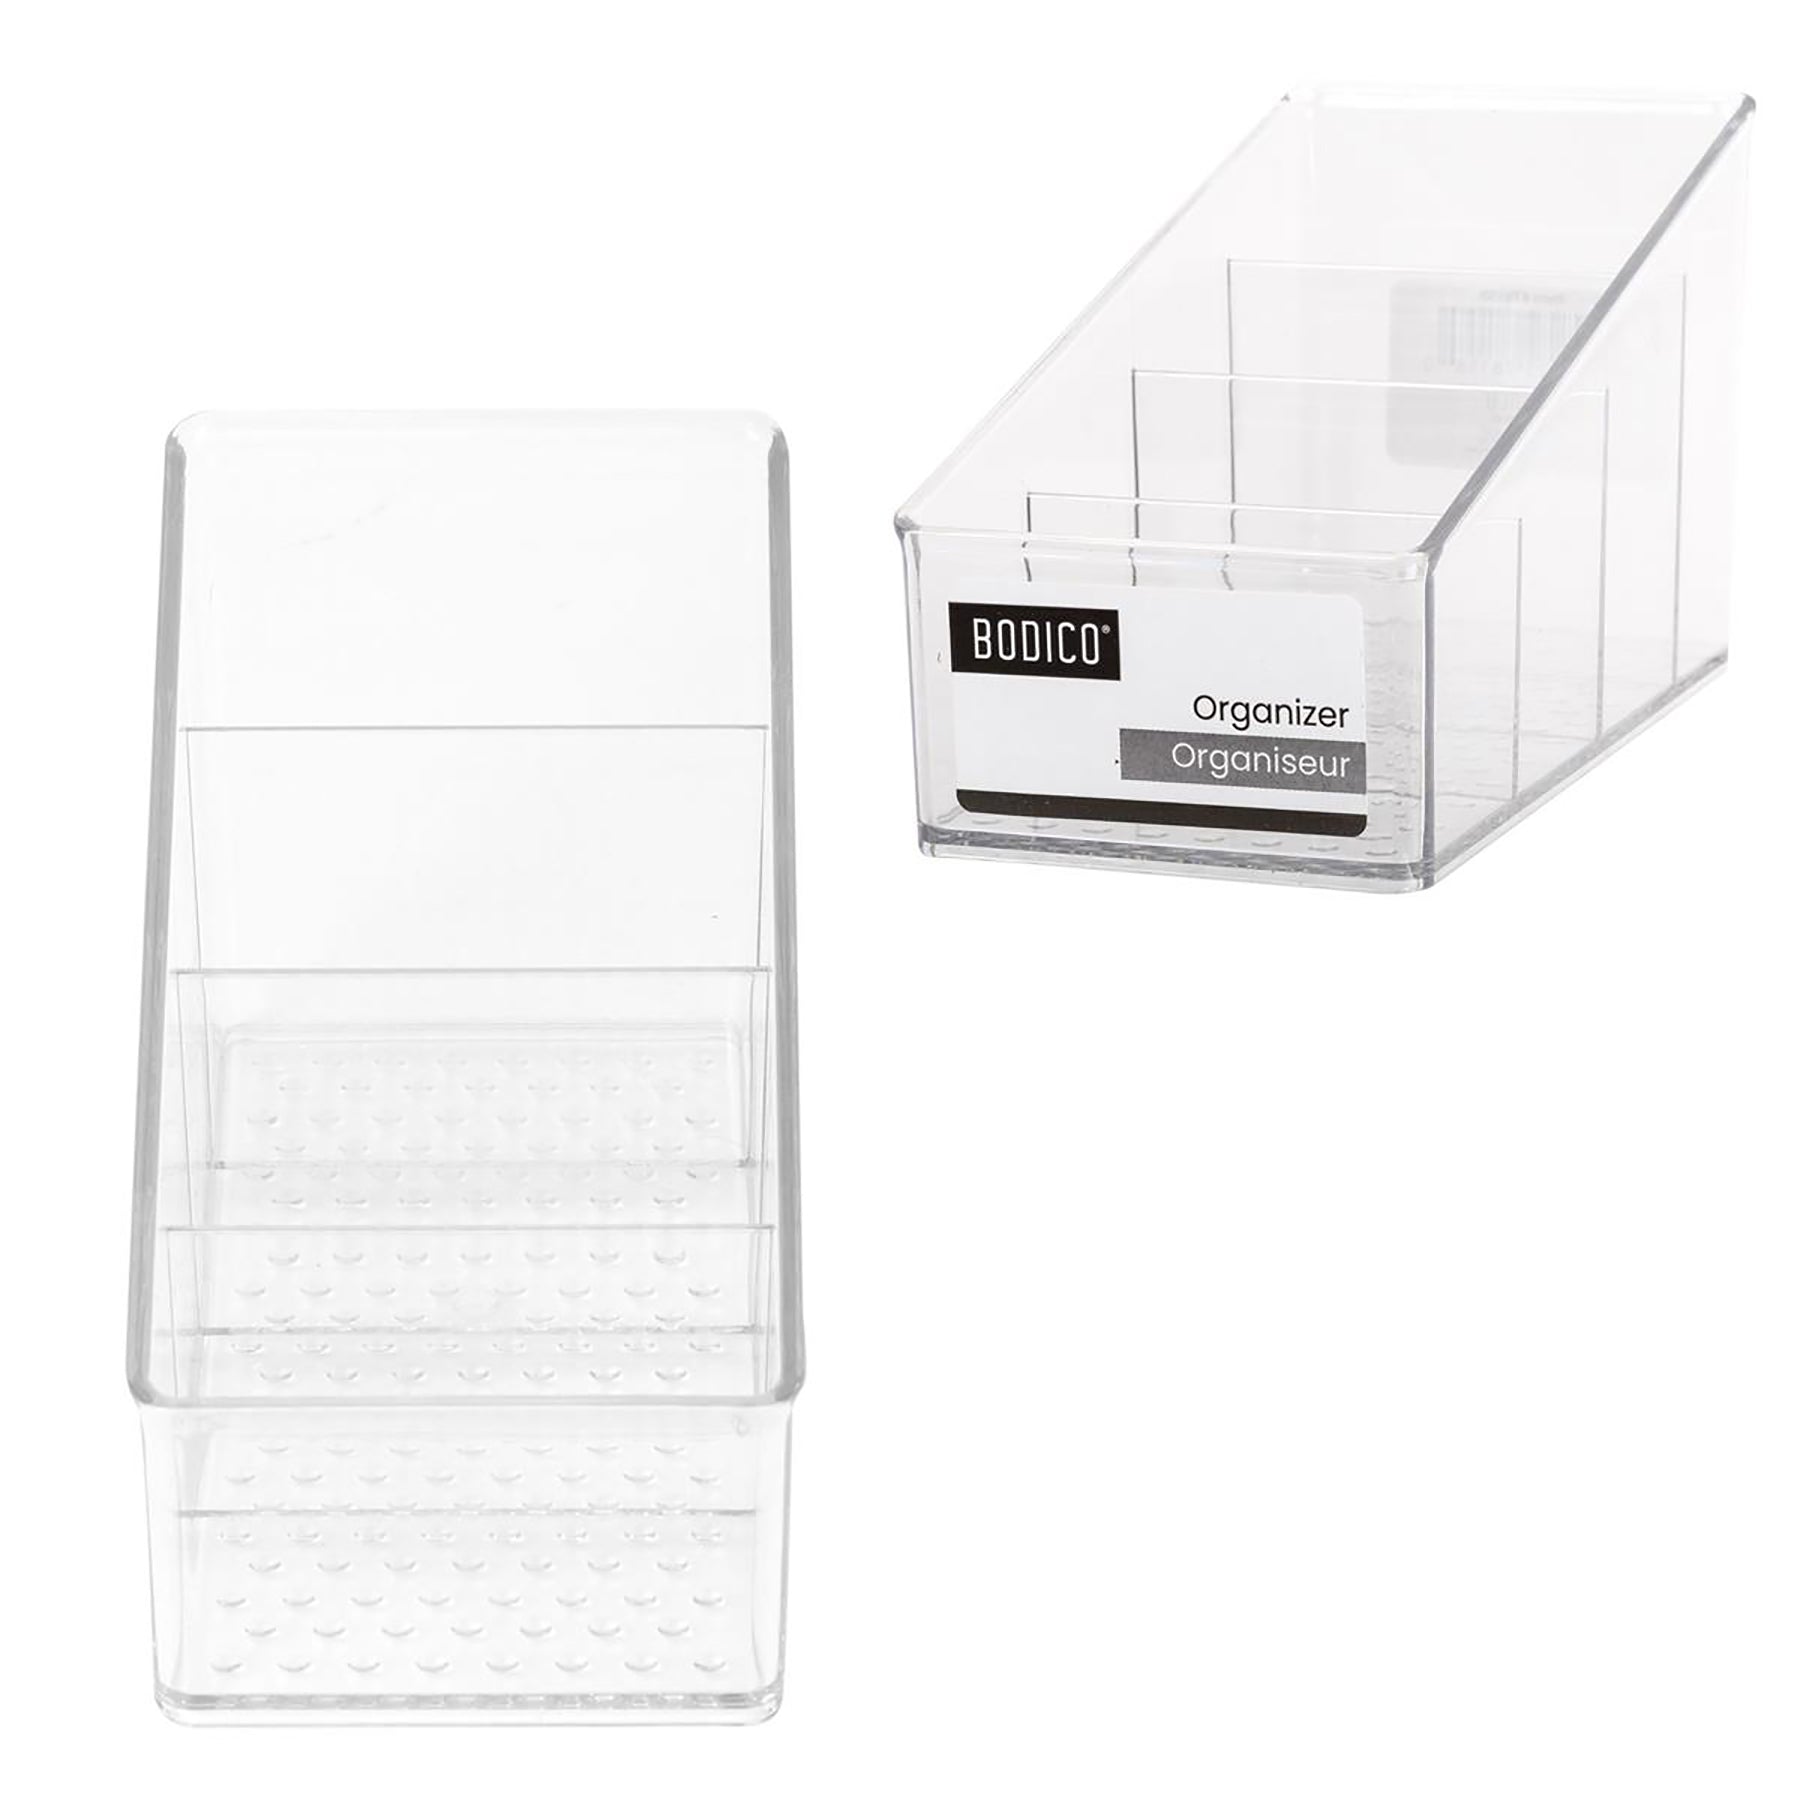 Bodico Organizer 4 Sections Clear Plastic 5.9x2.75x3.5in